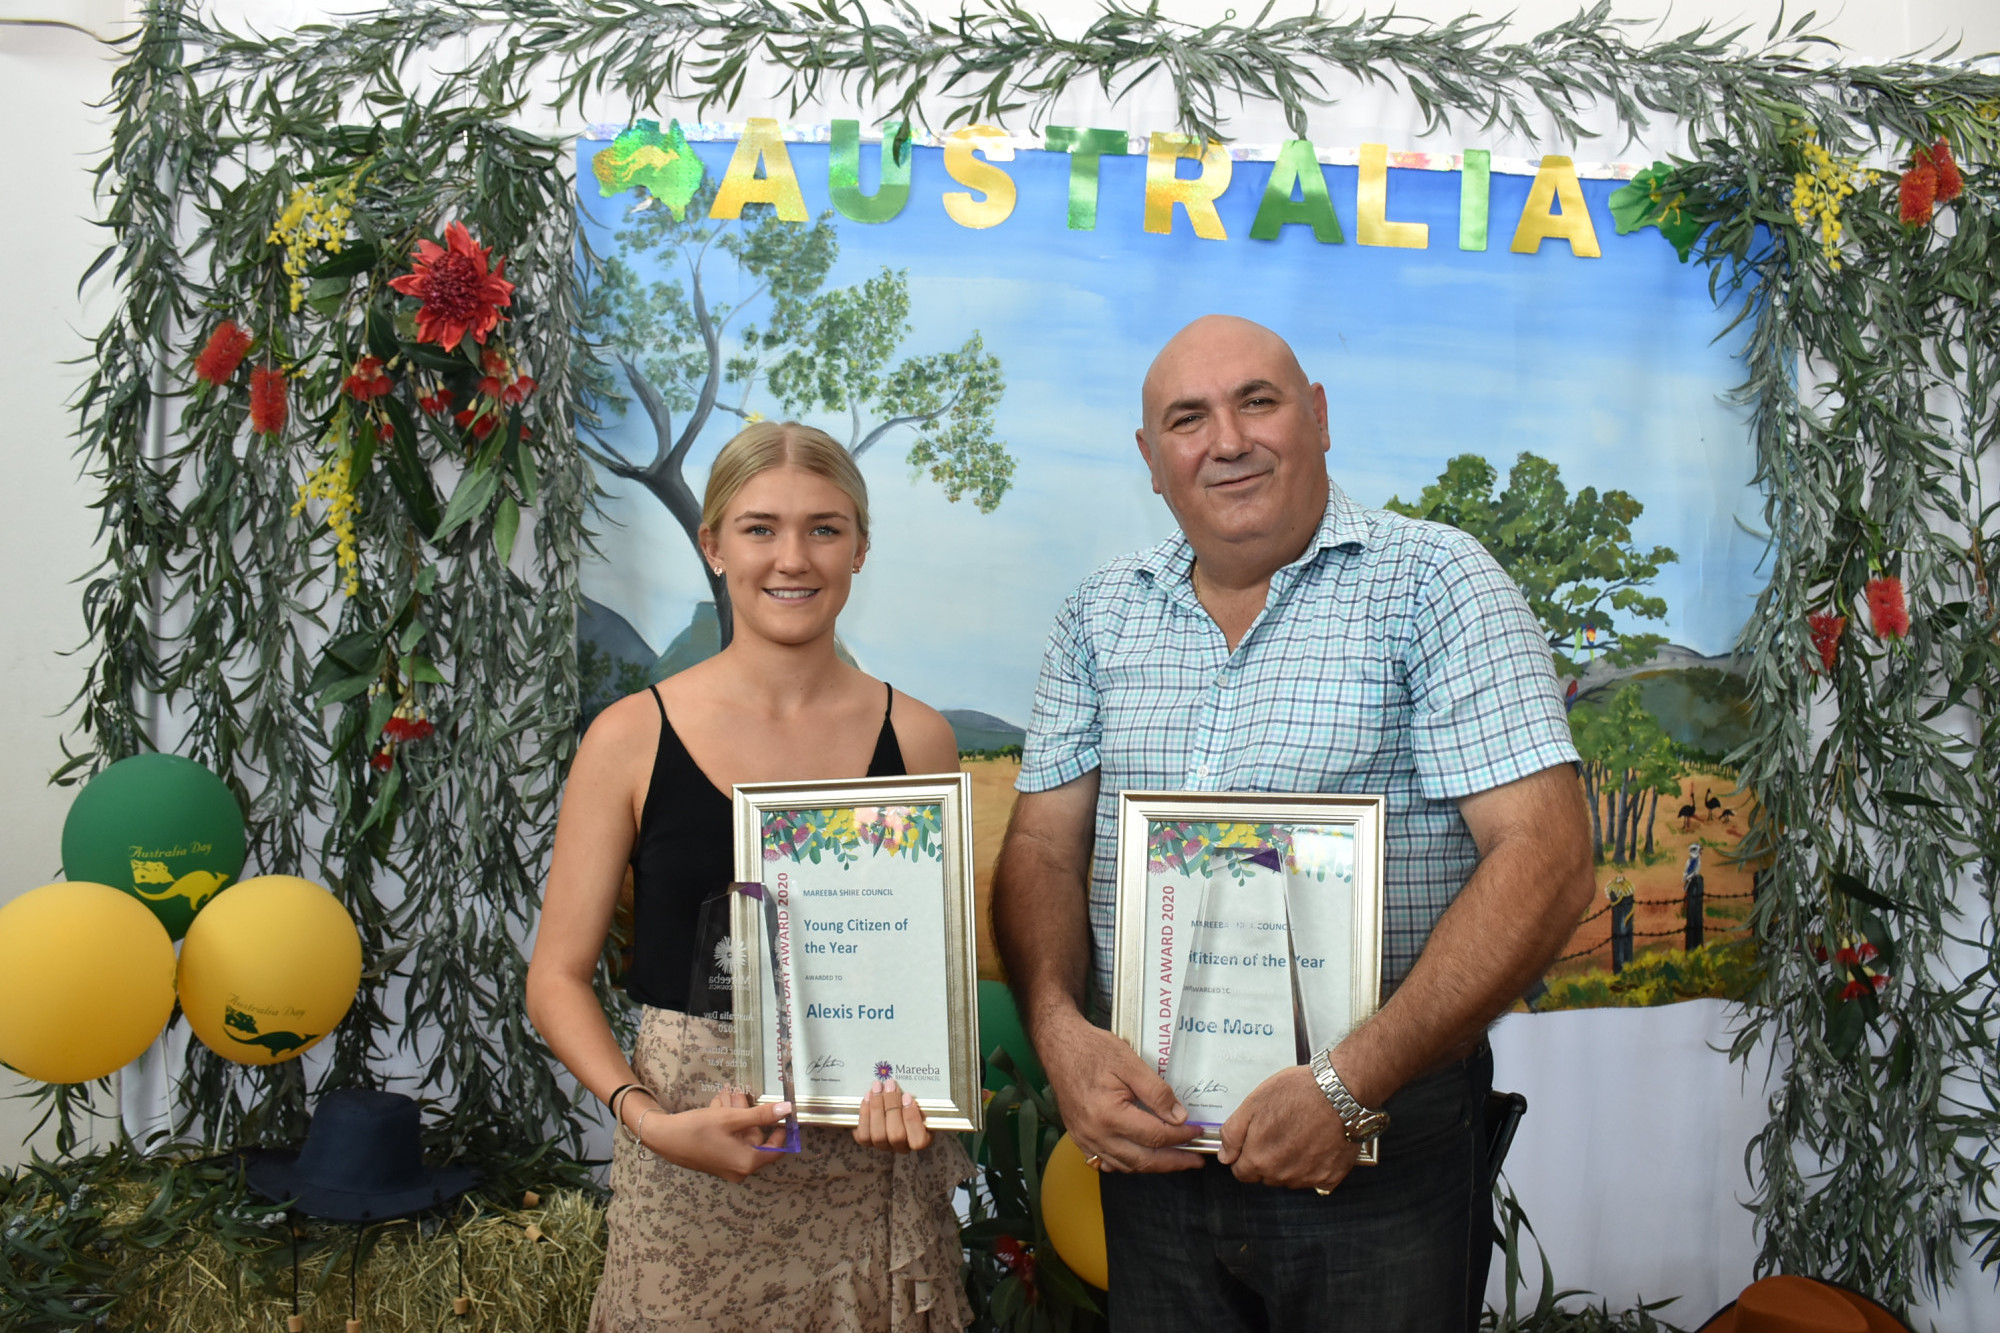 Last year's Australia Day Mareeba Junior Citizen of the Year Alexis Ford with Citizen of the year Joe Moro